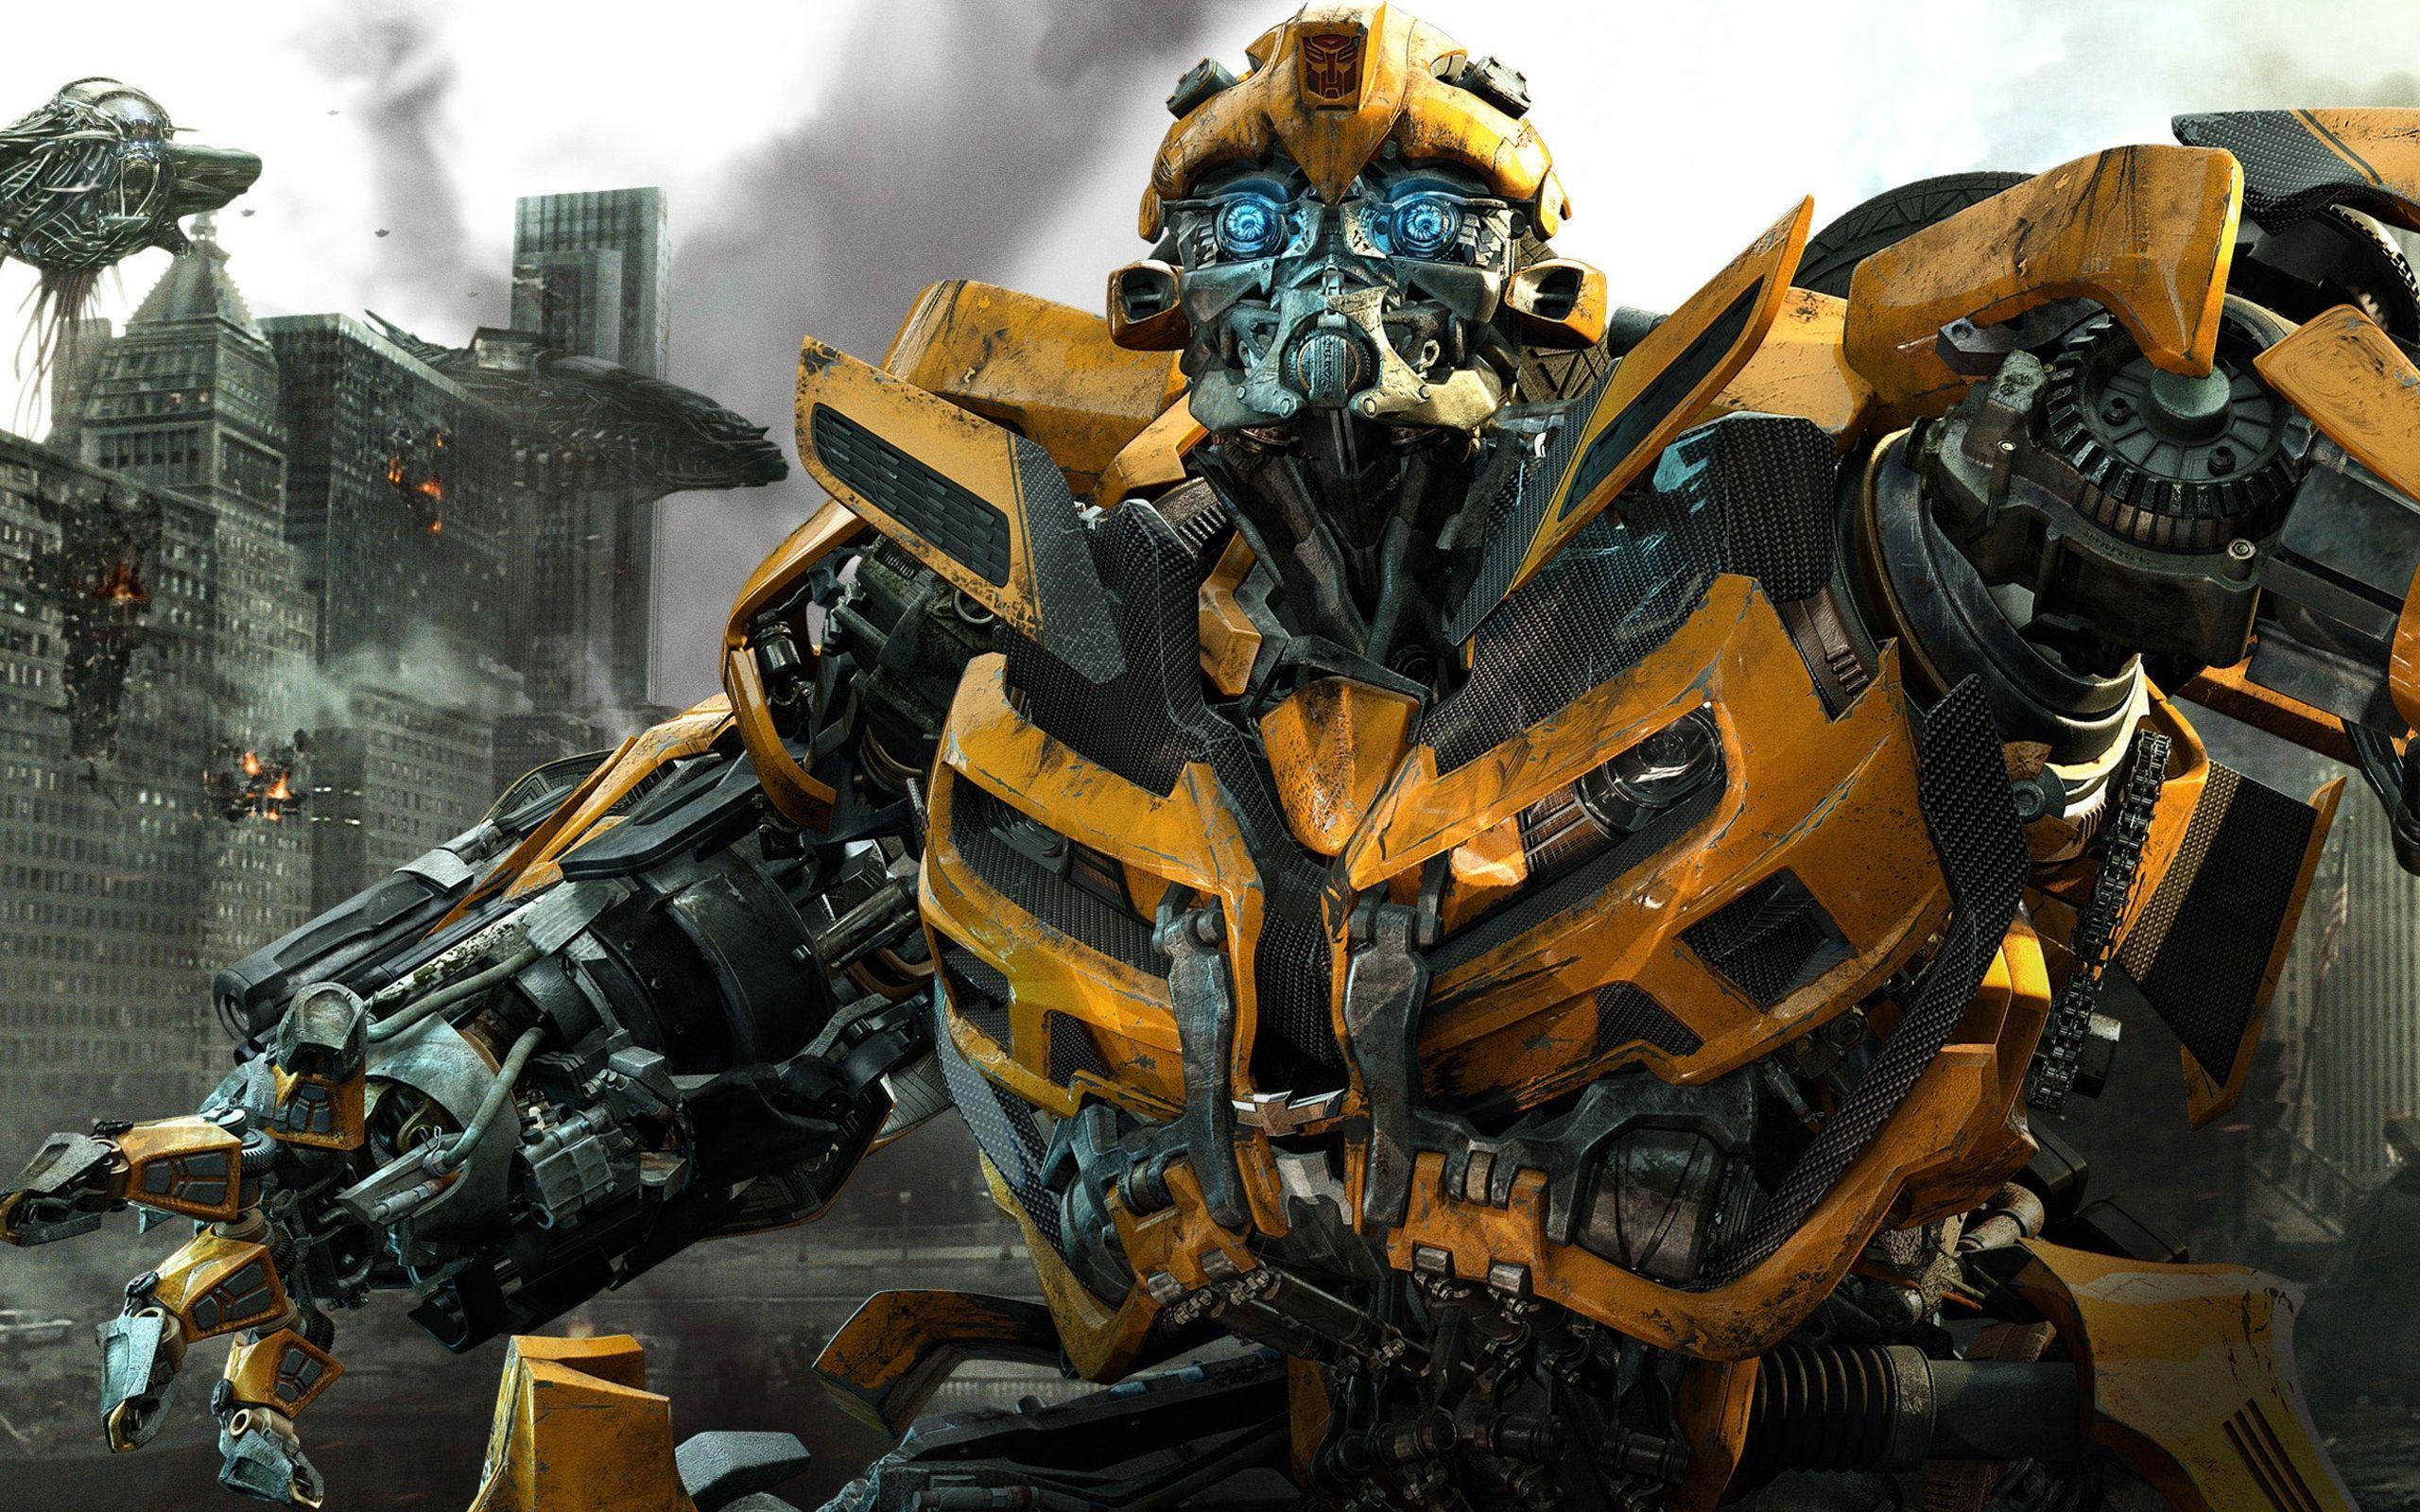 Transformers bumblebee wallpaper wallpaper for free download about